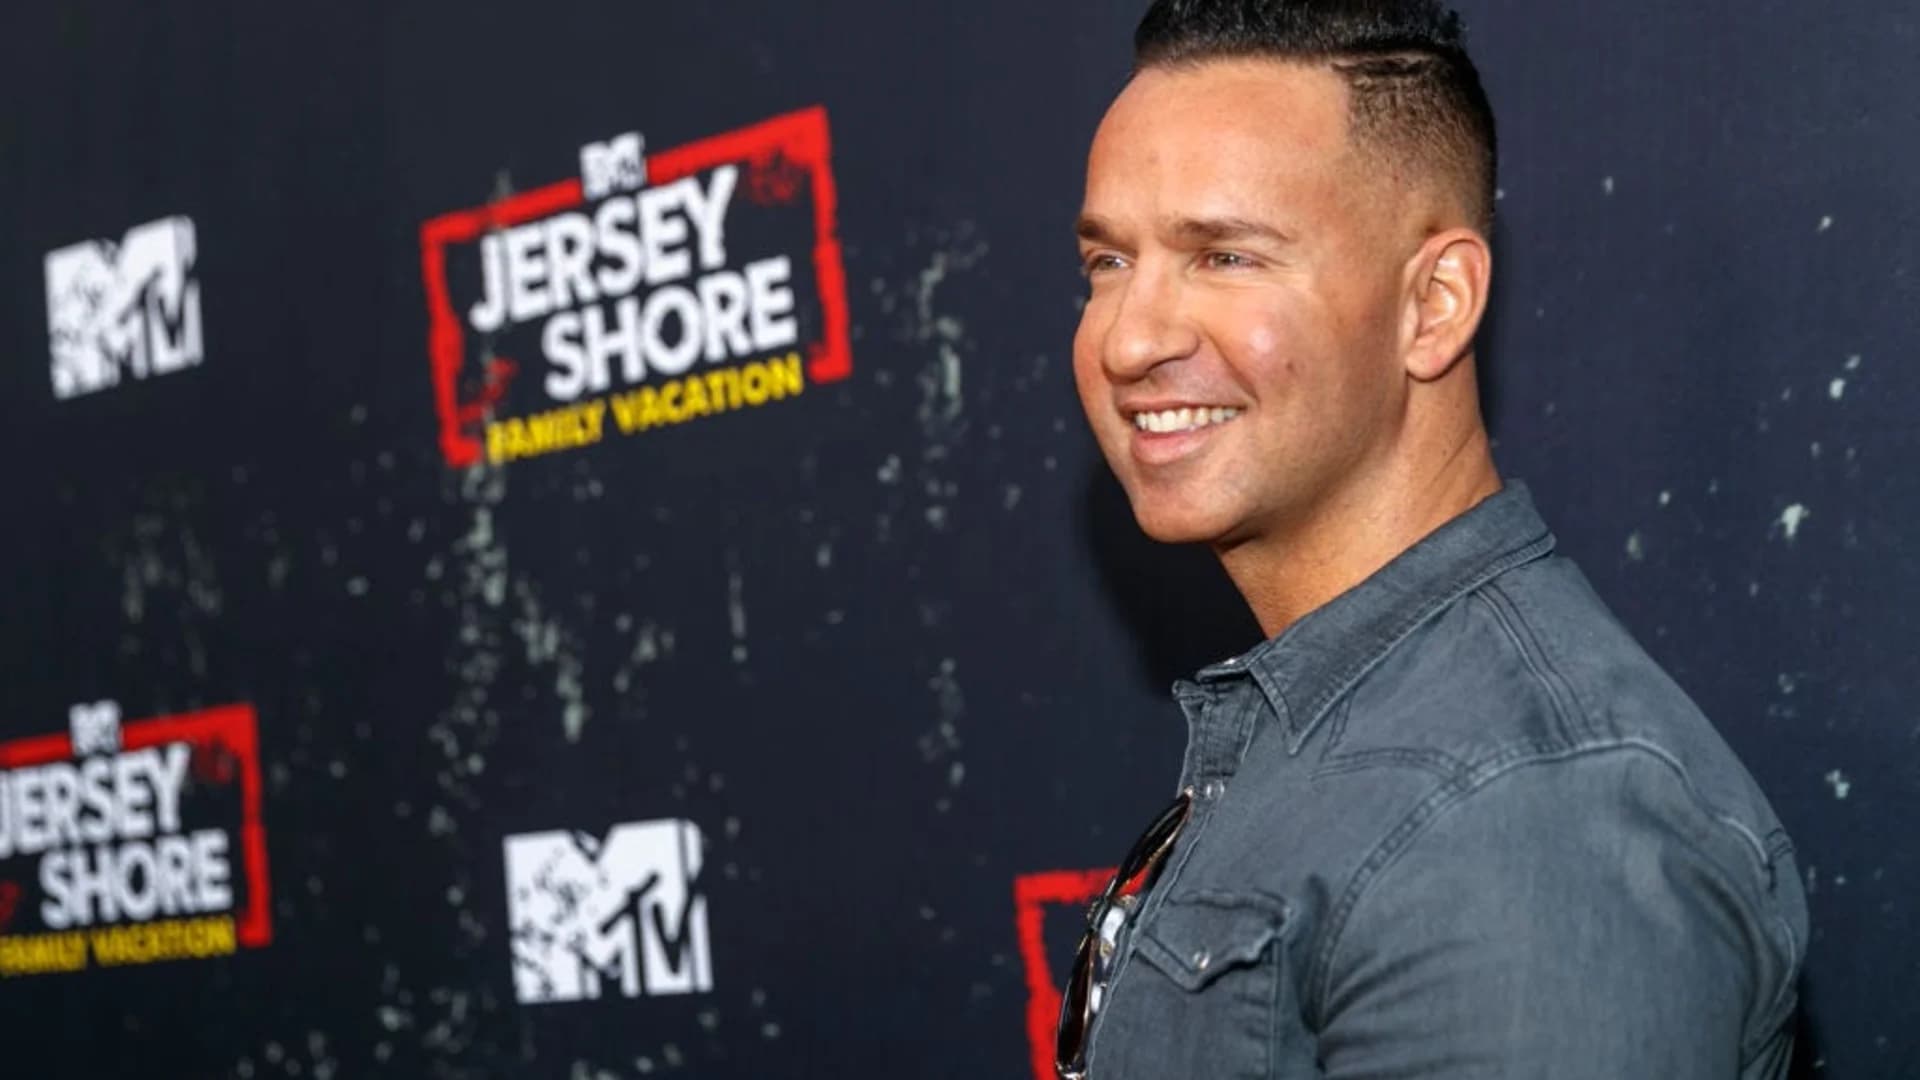 Mike 'The Situation' Sorrentino sentenced to prison for tax evasion